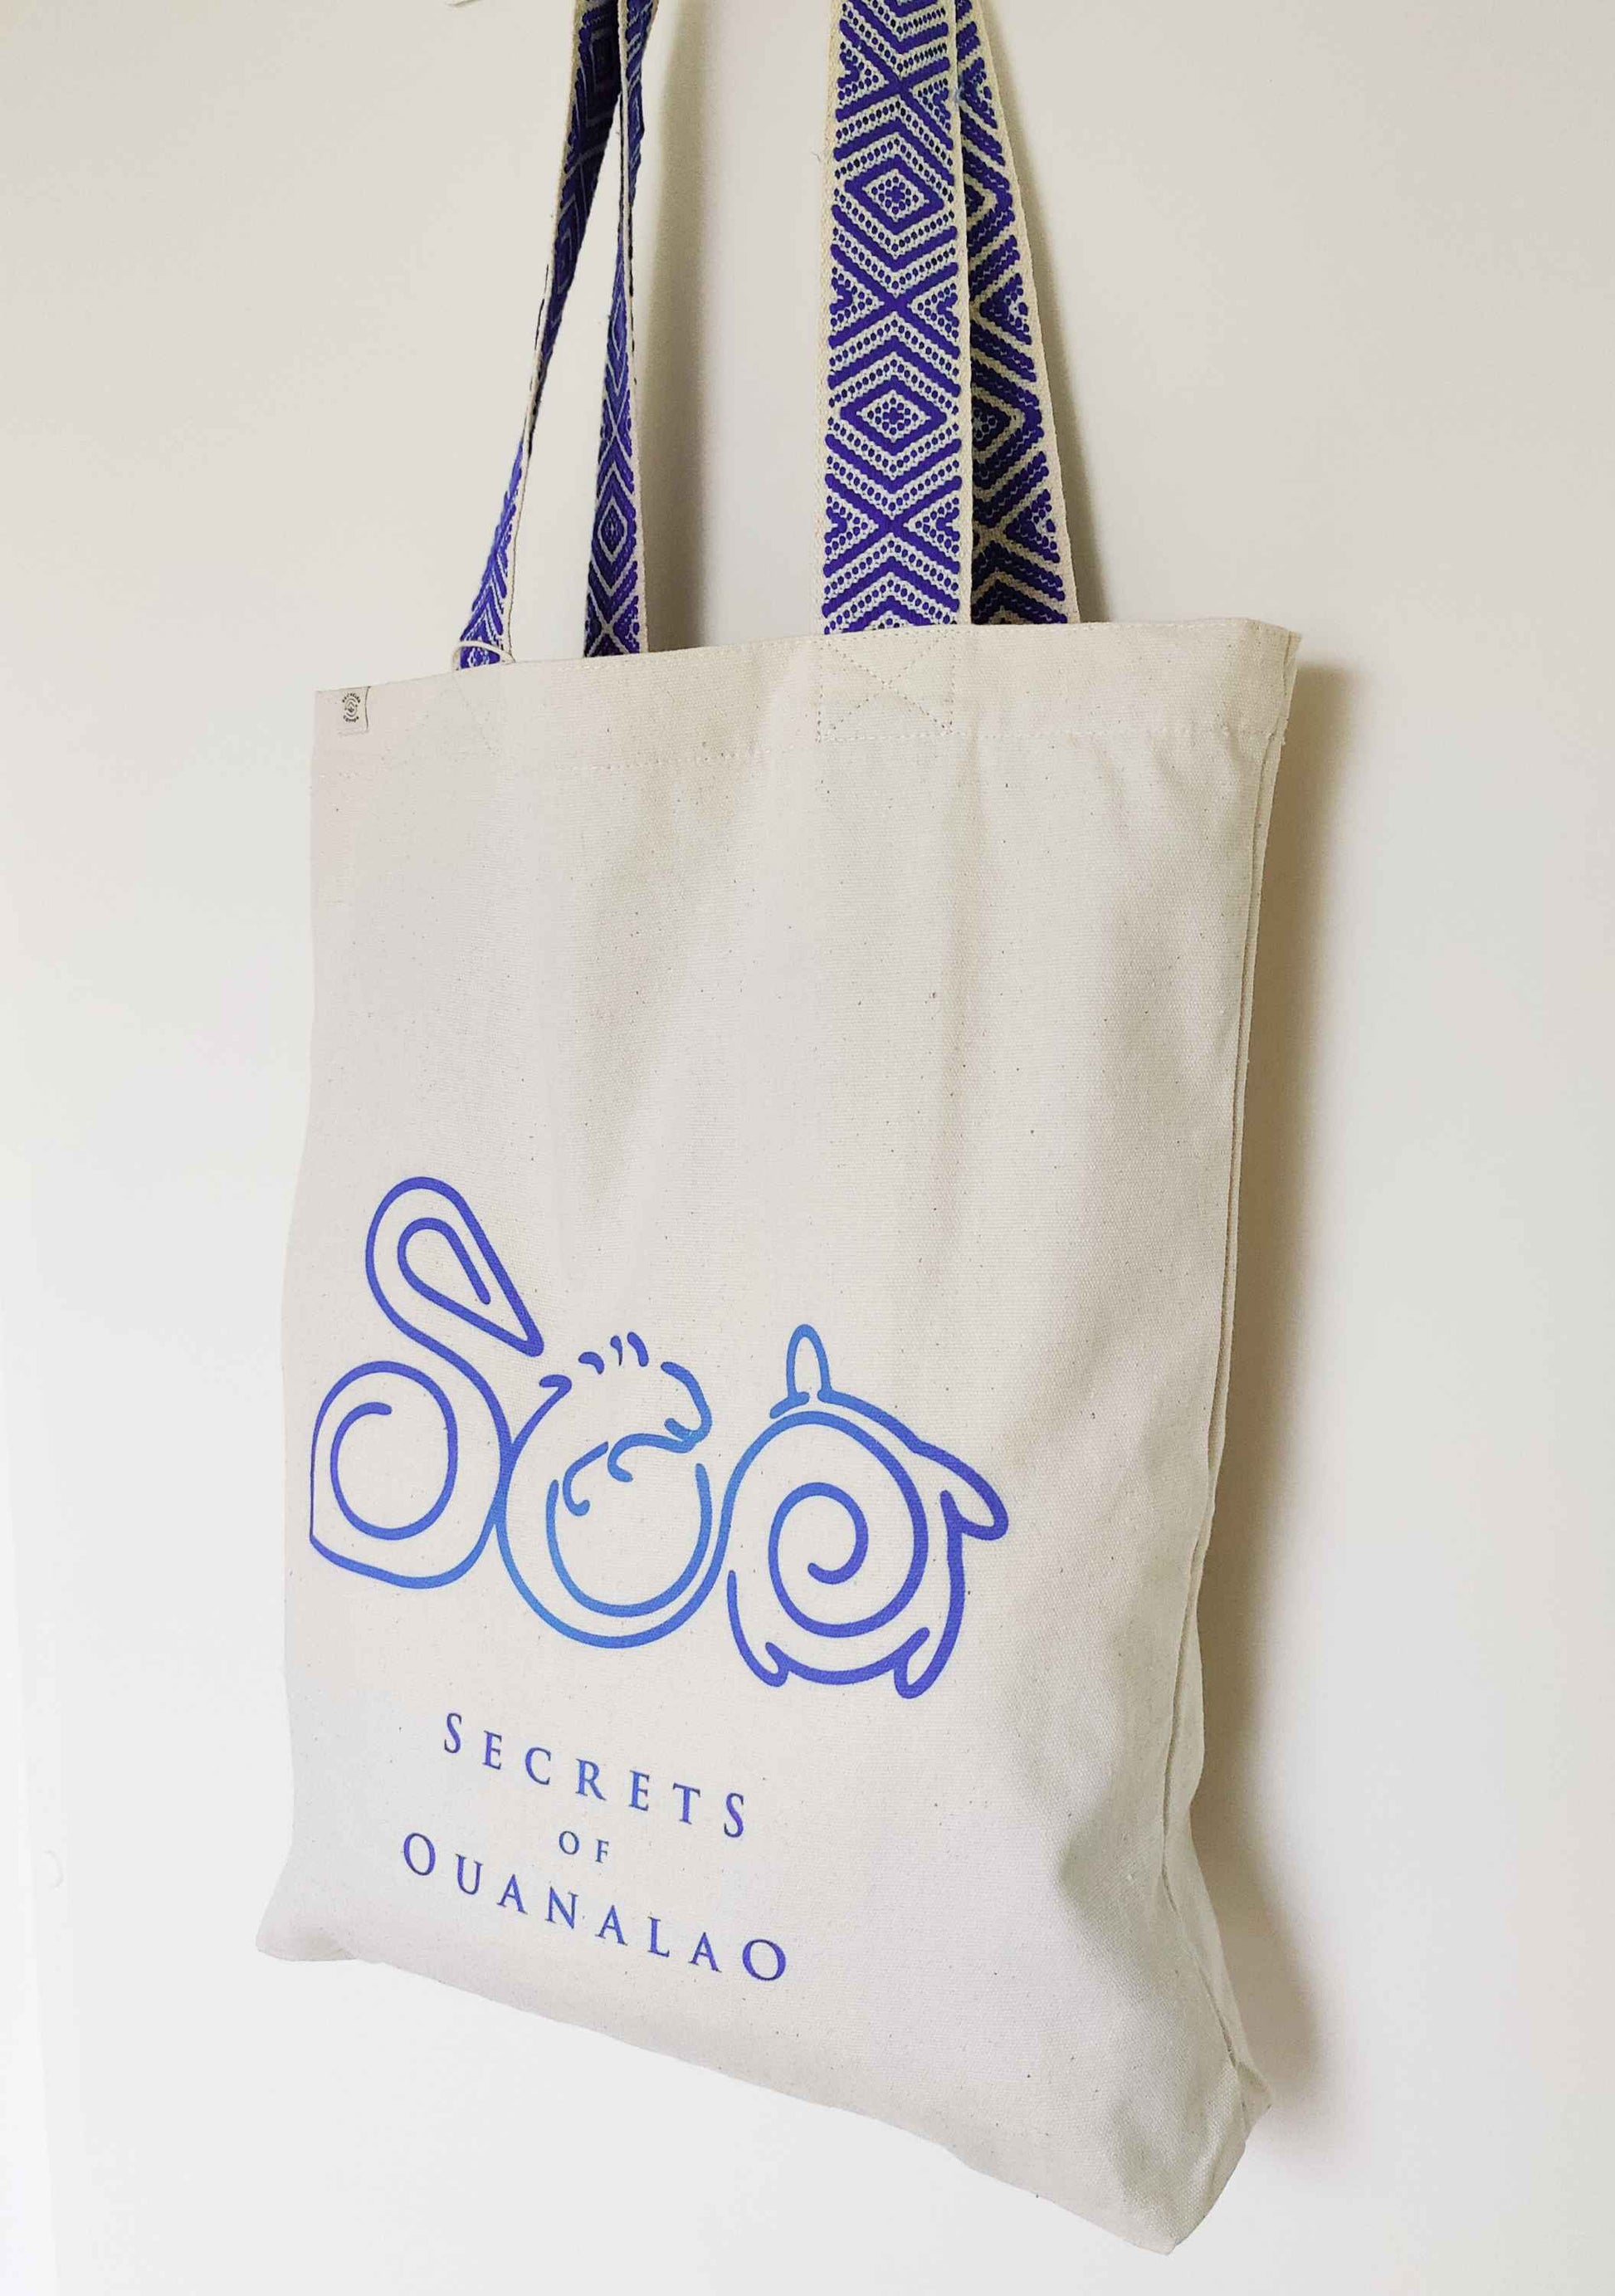 Vegan tote bag with blue handles and logo, including inside zipper pocket. The tote bag is made of recycled cotton.